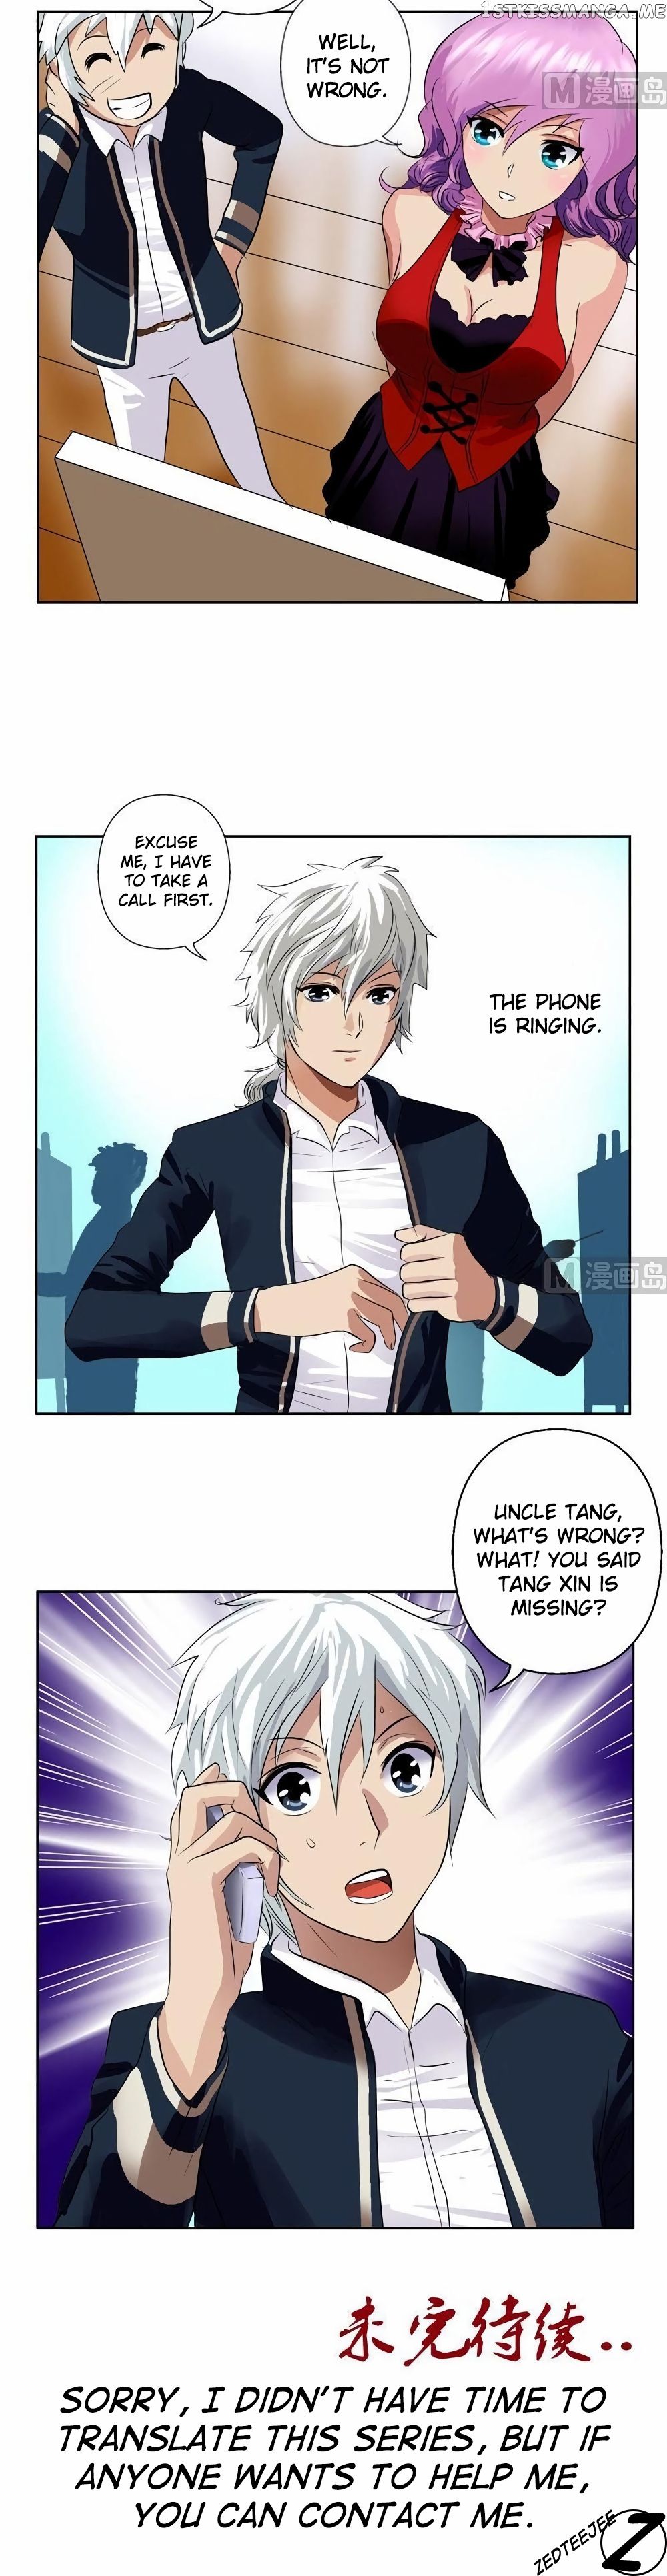 Urban Best Medic chapter 91 - Page 10